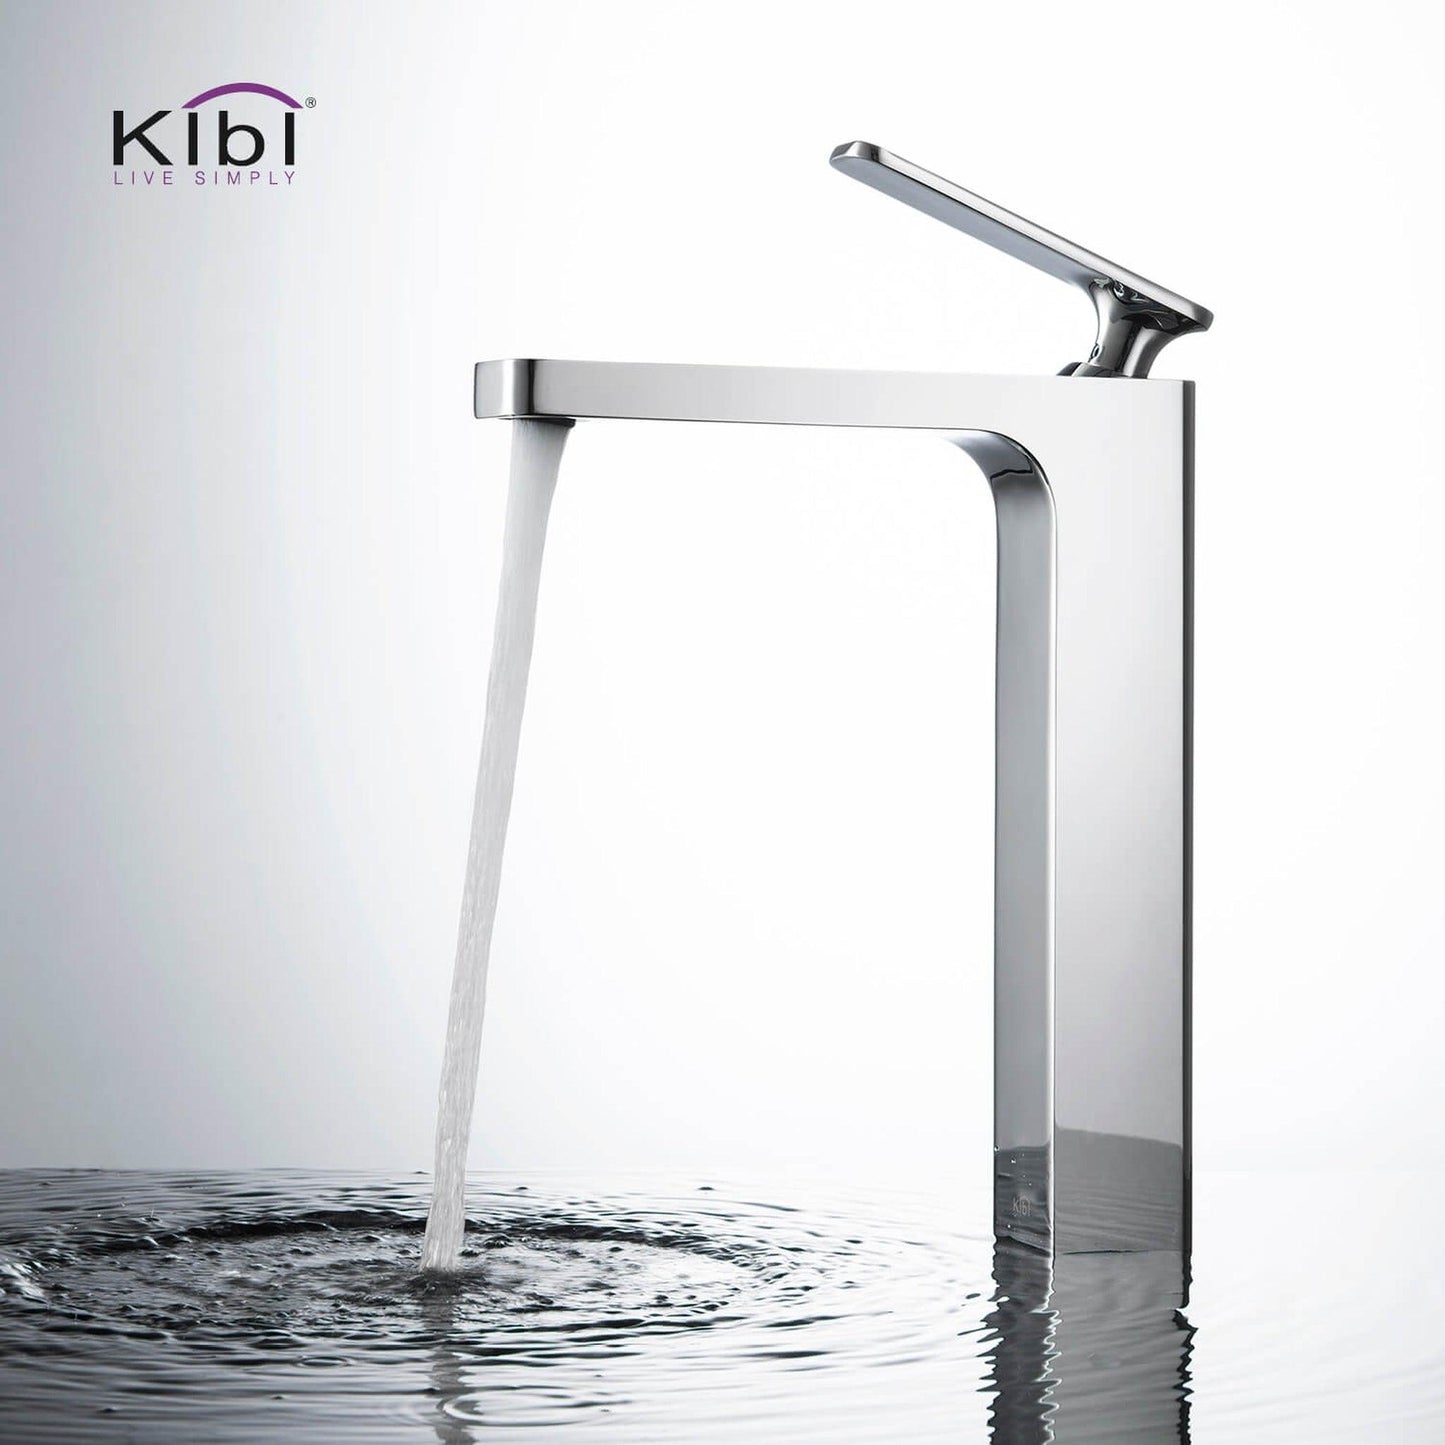 KIBI Infinity Single Handle Chrome Solid Brass Bathroom Vanity Vessel Sink Faucet With Pop-Up Drain Stopper Small Cover Without Overflow